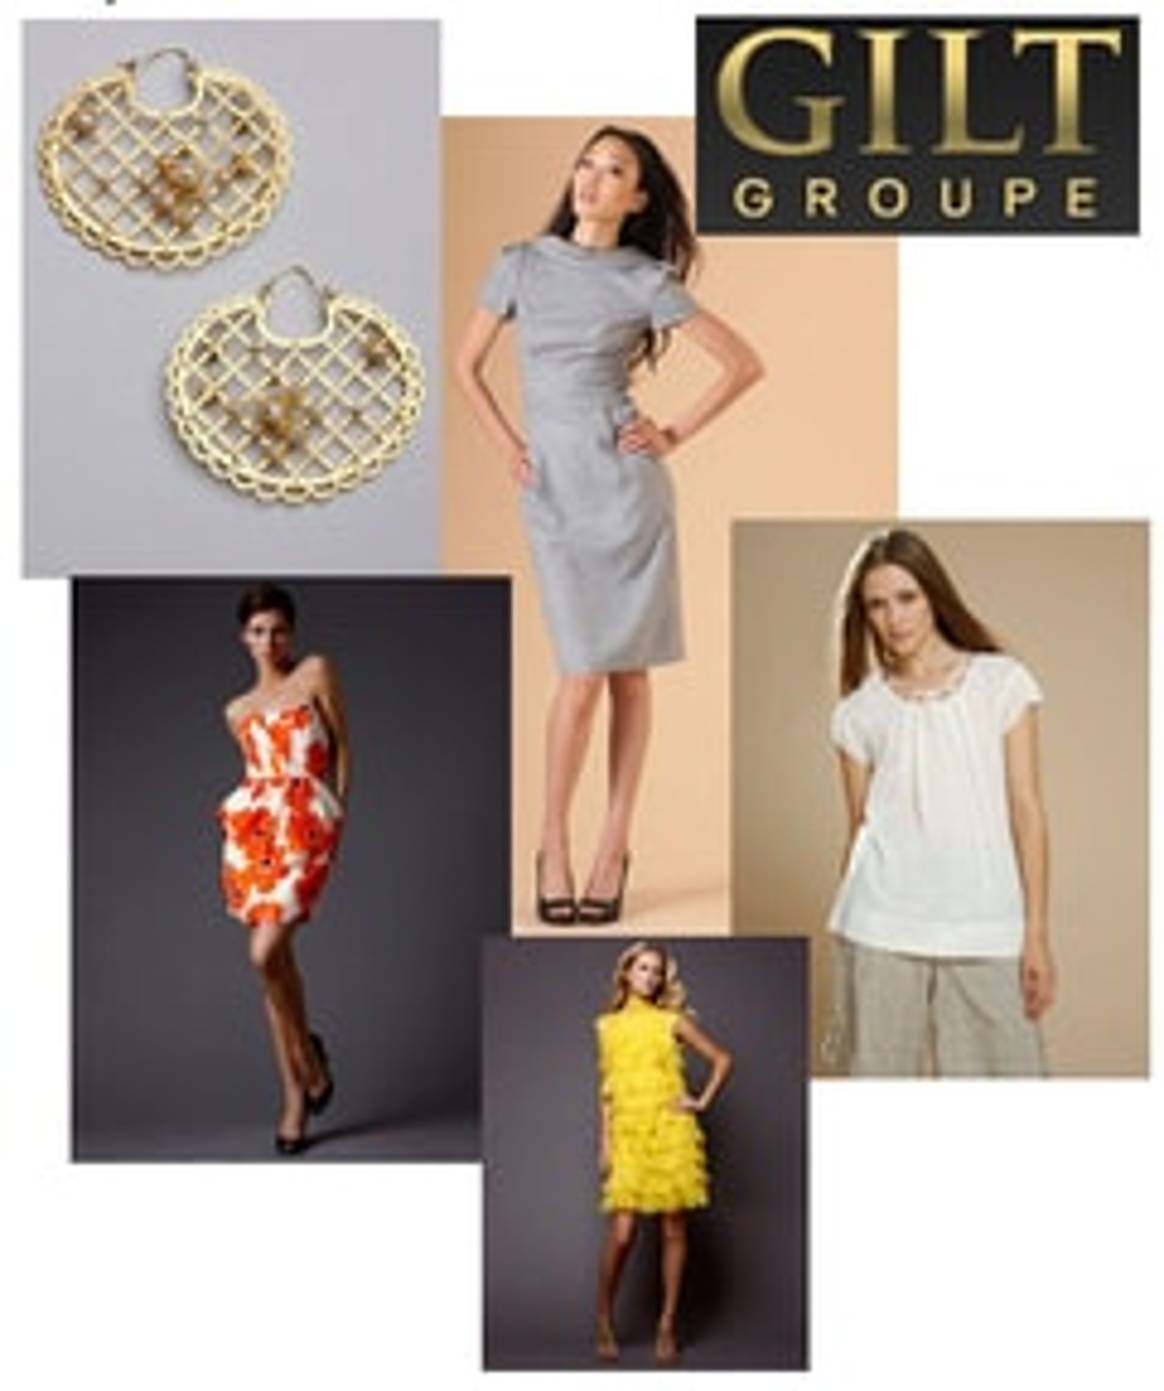 Gilt Groupe considers going public